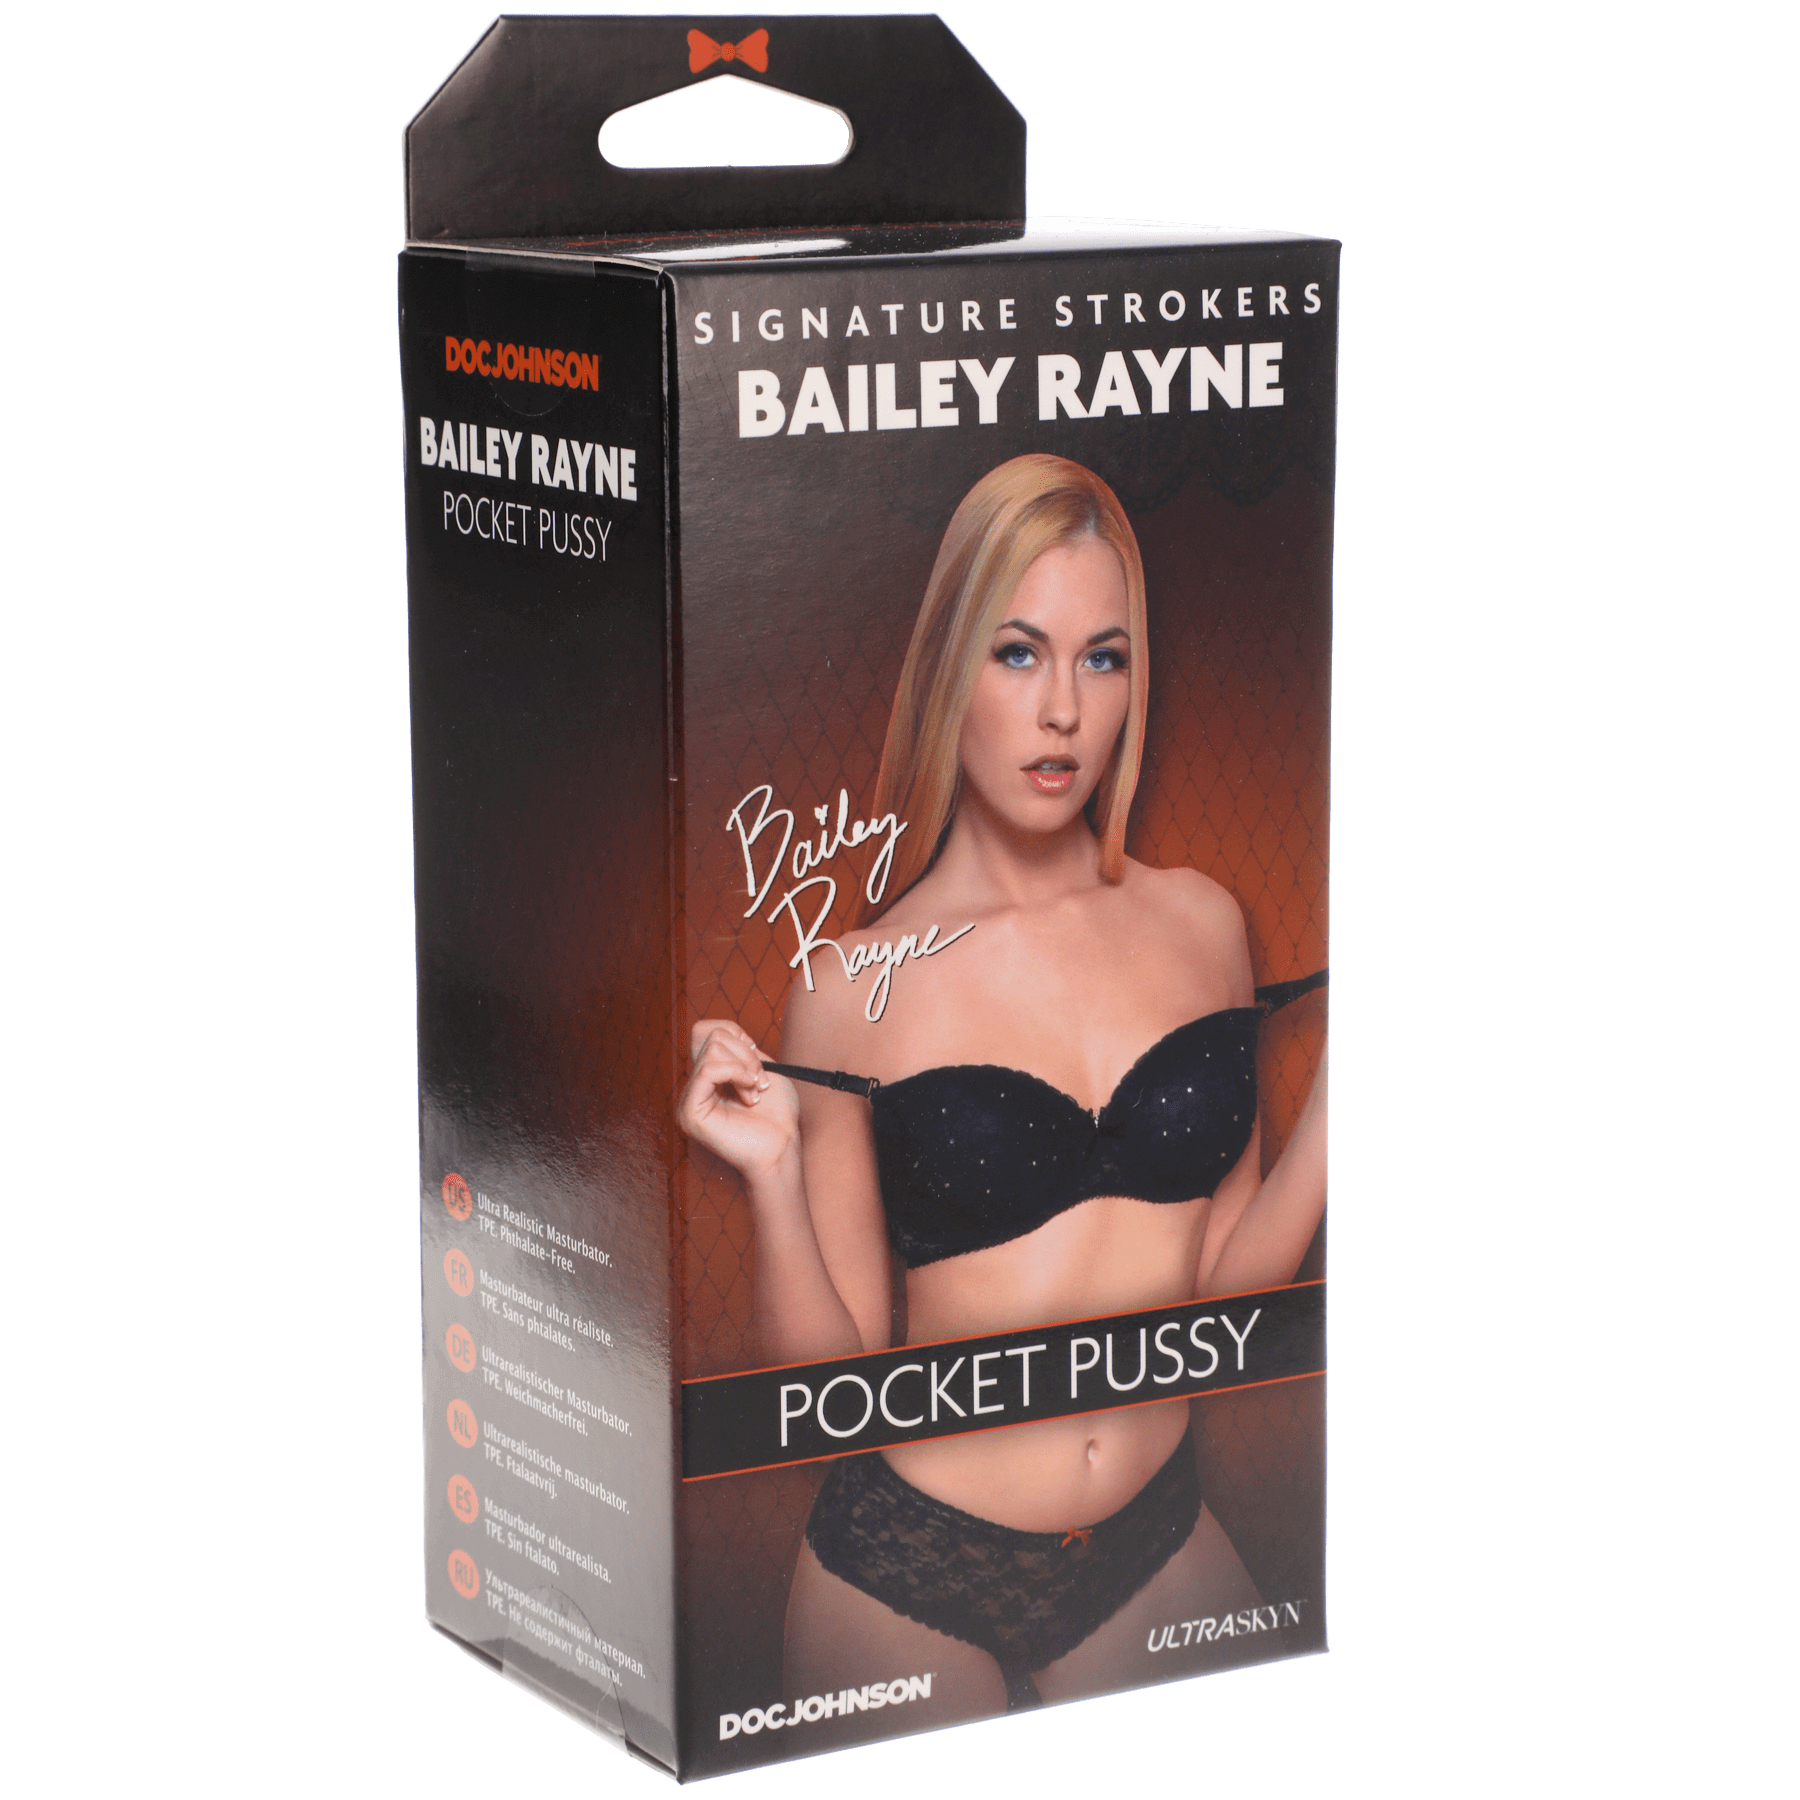 Signature Strokers Bailey Rayne ULTRASKYN Pocket Pussy - Thorn & Feather Sex Toy Canada